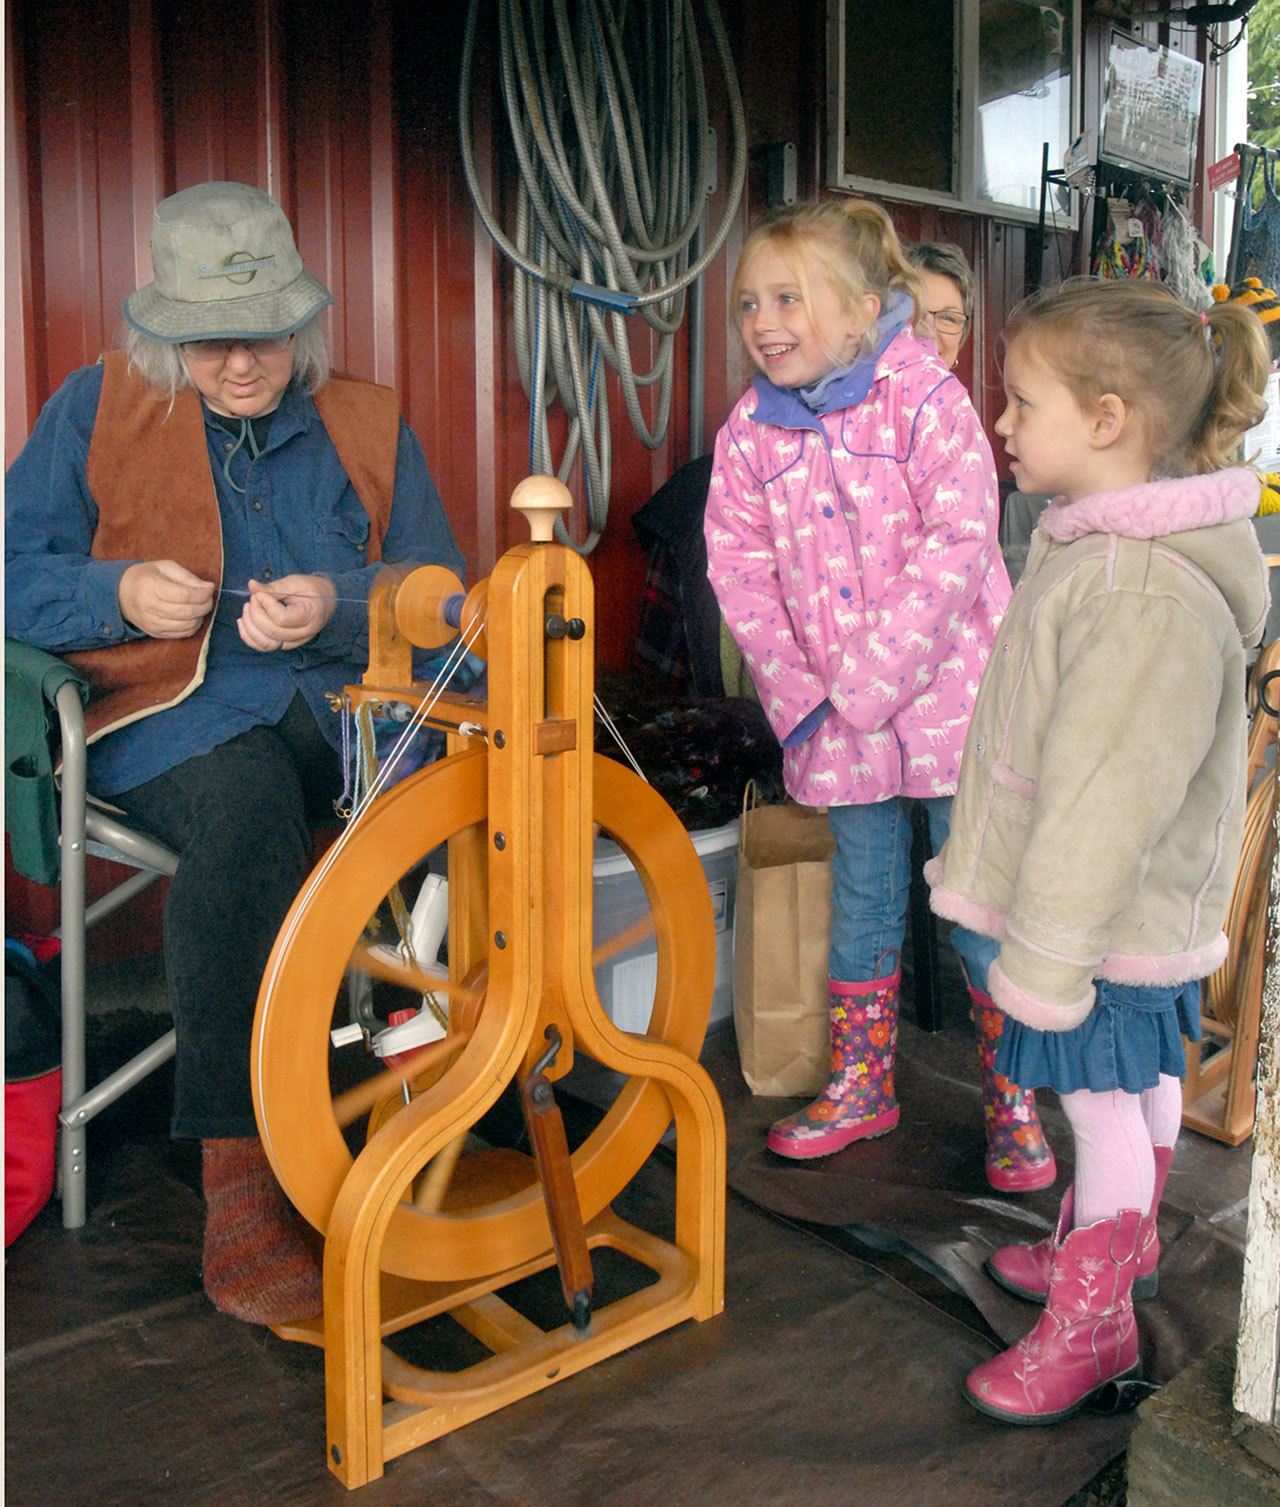 Alexia Fuller, 5, center, and Adeline Slezak, 3, both of Sequim, watch as Alison Sell, a member of the North Olympic Shuttle and Spindle Guild, spins wool into fiber at Lurkalee Gaare sheep farm near Agnew, one of seven farms and businesses taking part at the 20th annual Clallam County Farm Tour on Saturday. The event served as a celebration of agriculture and farmland. (Keith Thorpe/Peninsula Daily News)